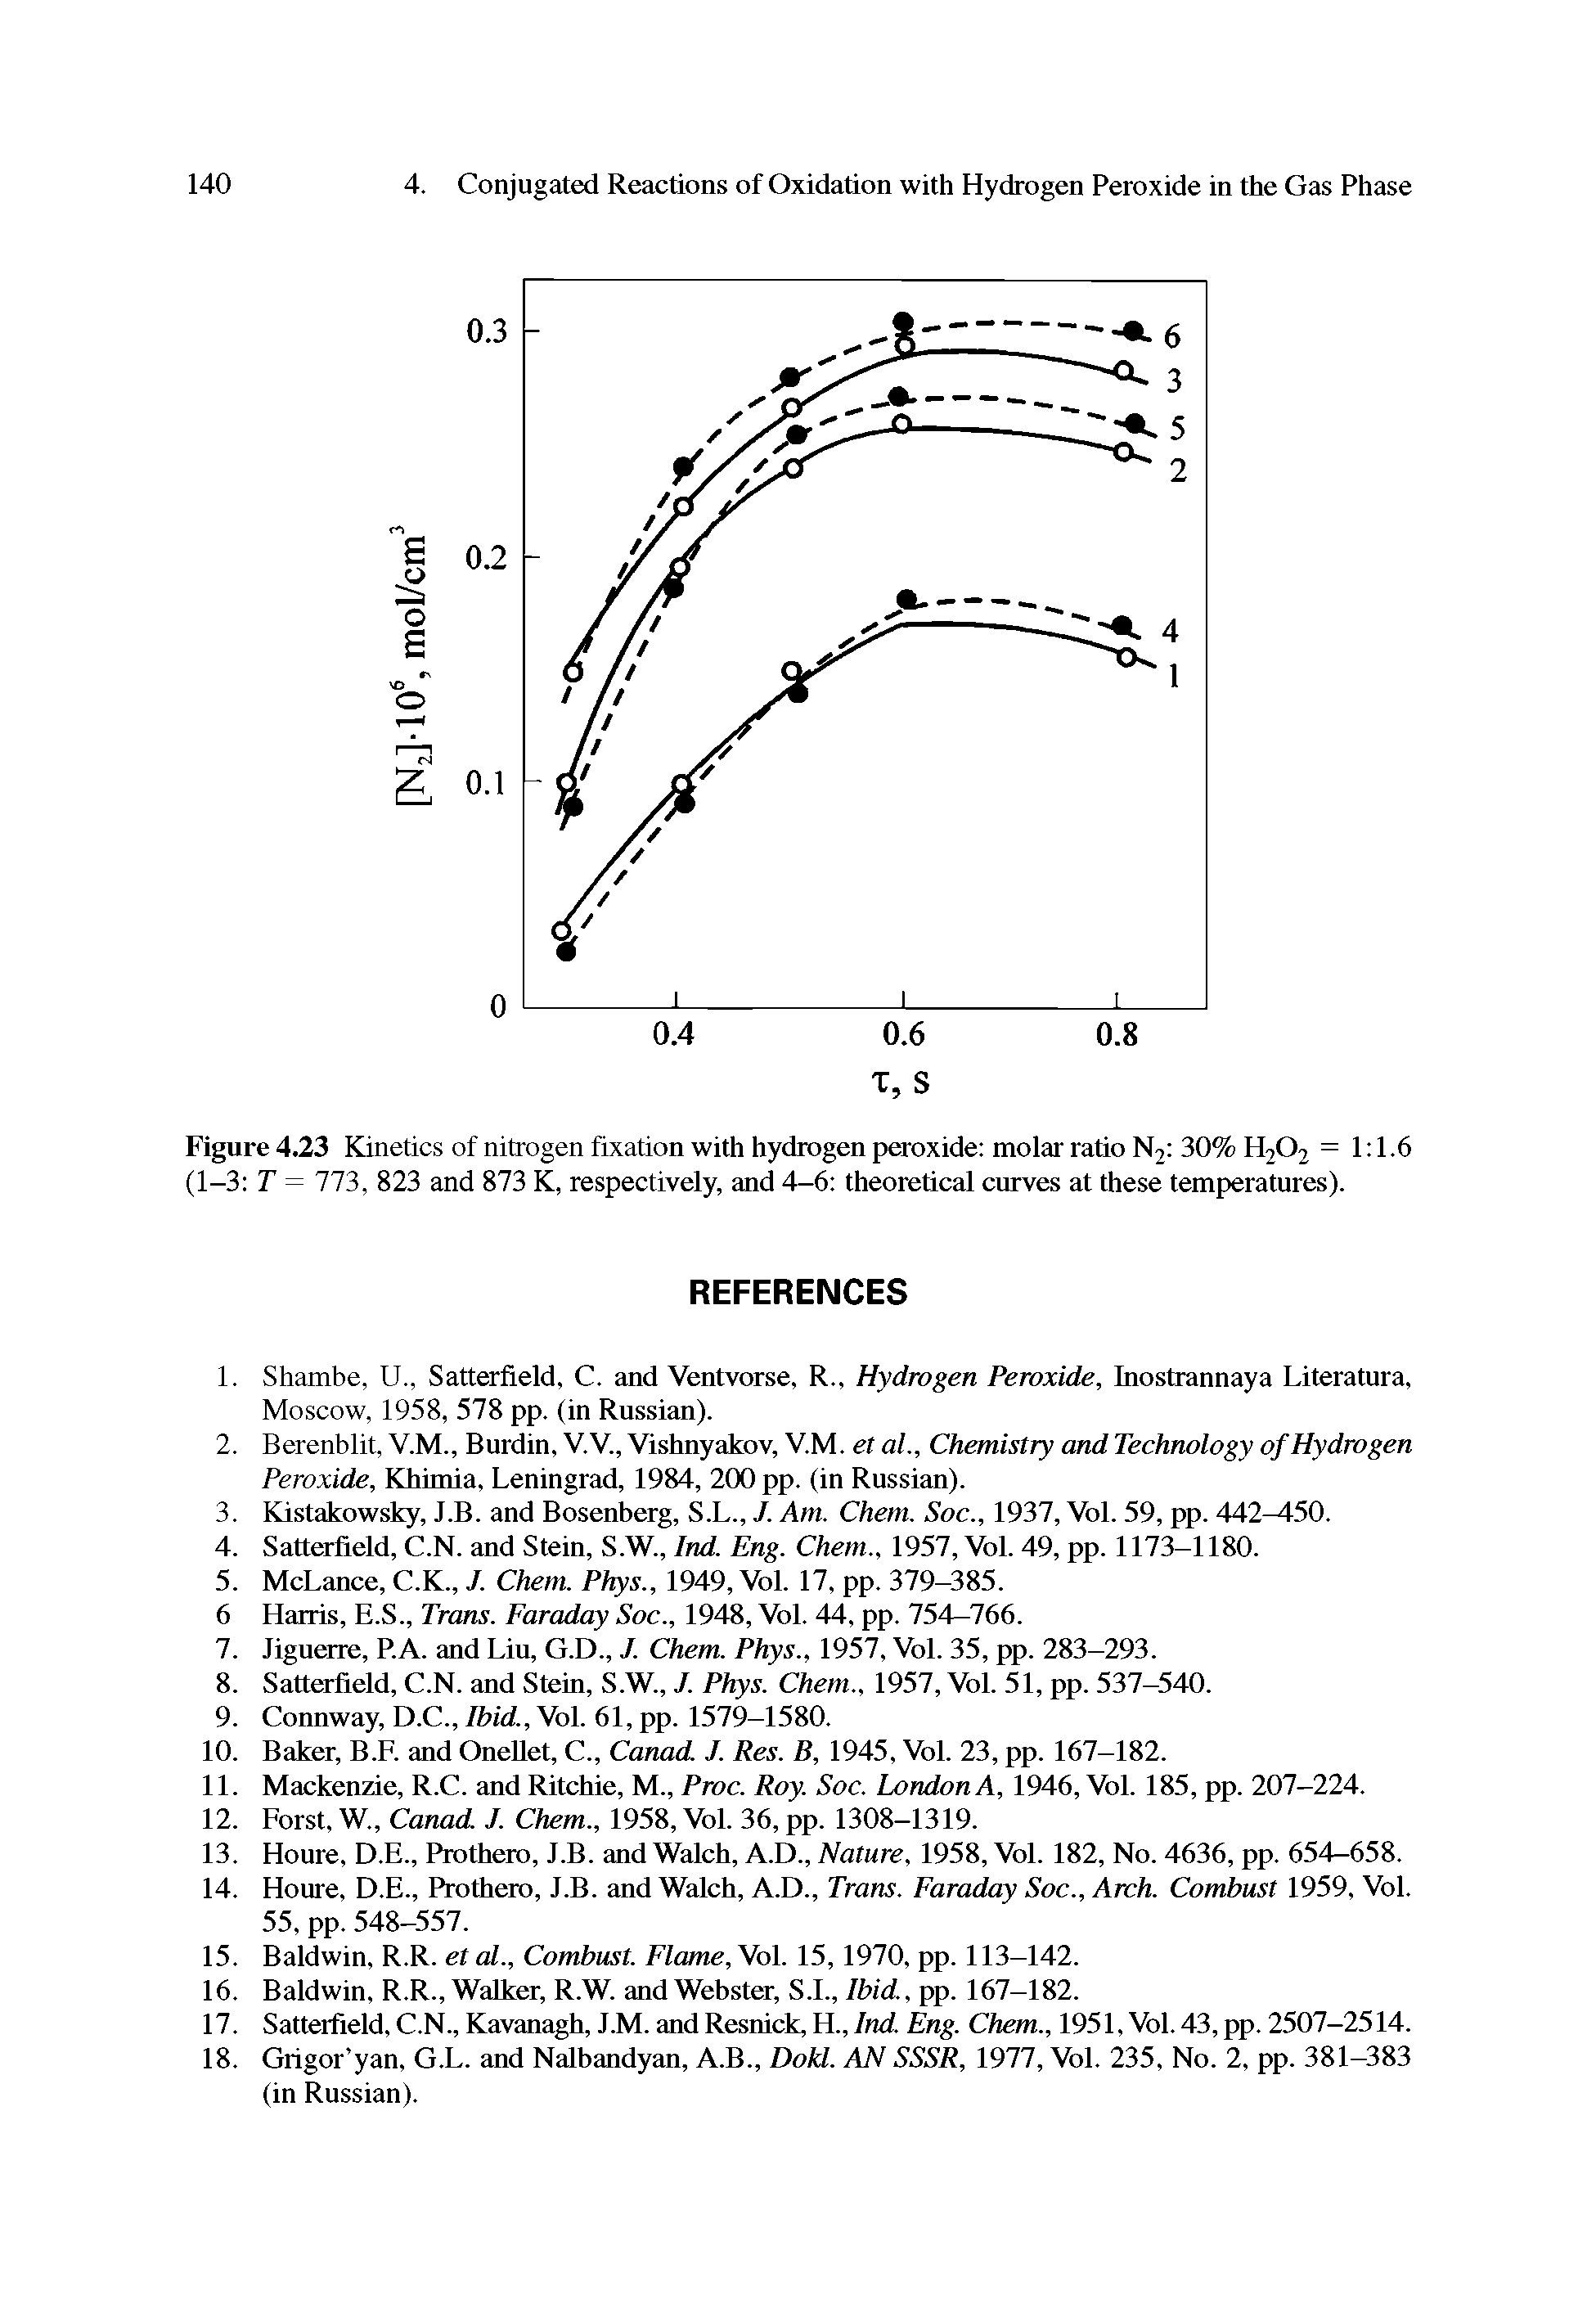 Figure 4.23 Kinetics of nitrogen fixation with hydrogen peroxide molar ratio N2 30% H202 = 1 1.6 (1-3 T = 773, 823 and 873 K, respectively, and 4—6 theoretical curves at these temperatures).